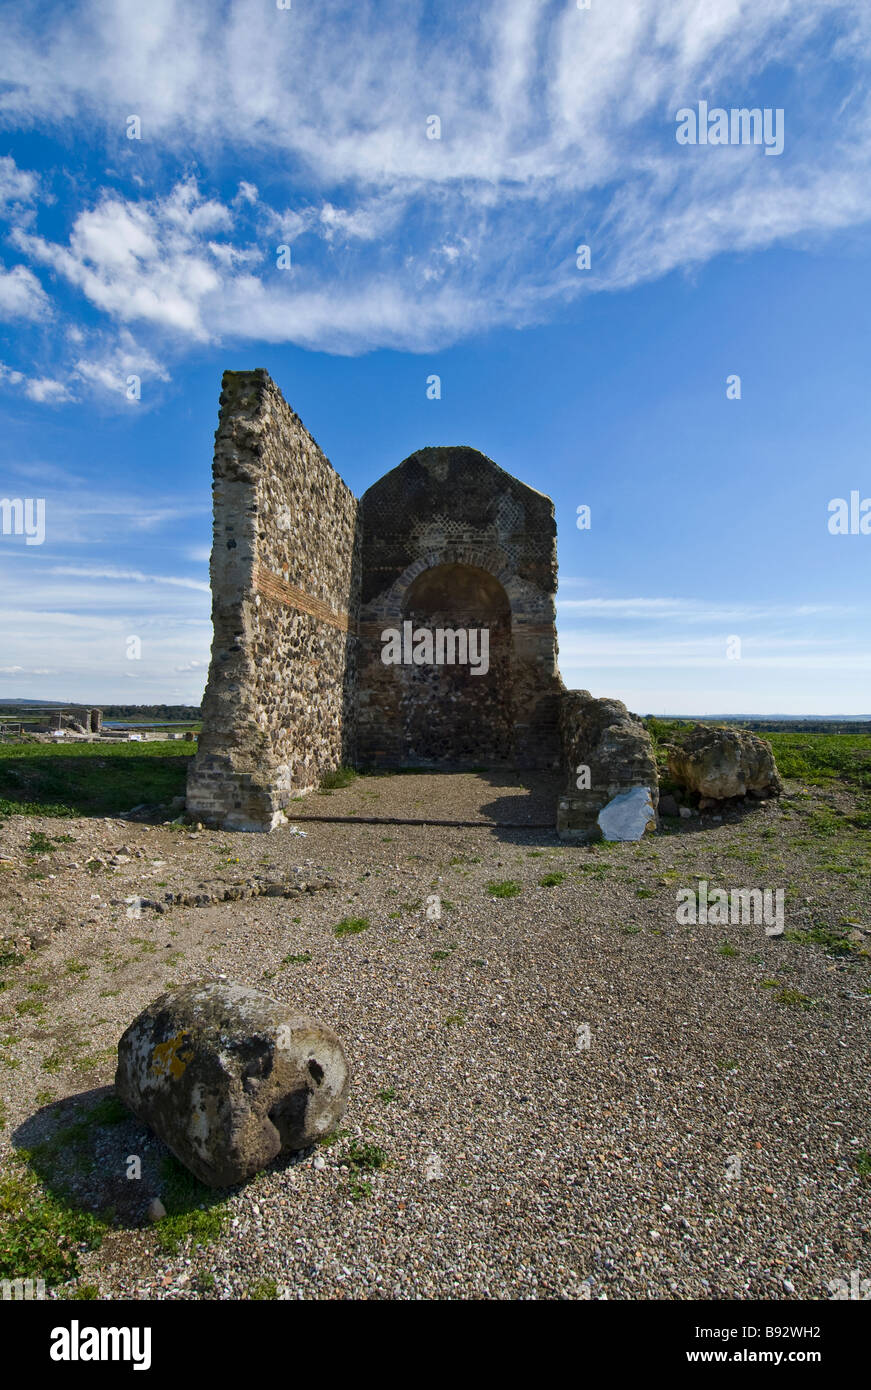 archaeological site of the Etruscan city of Vulci in Lazio in Italy Stock Photo